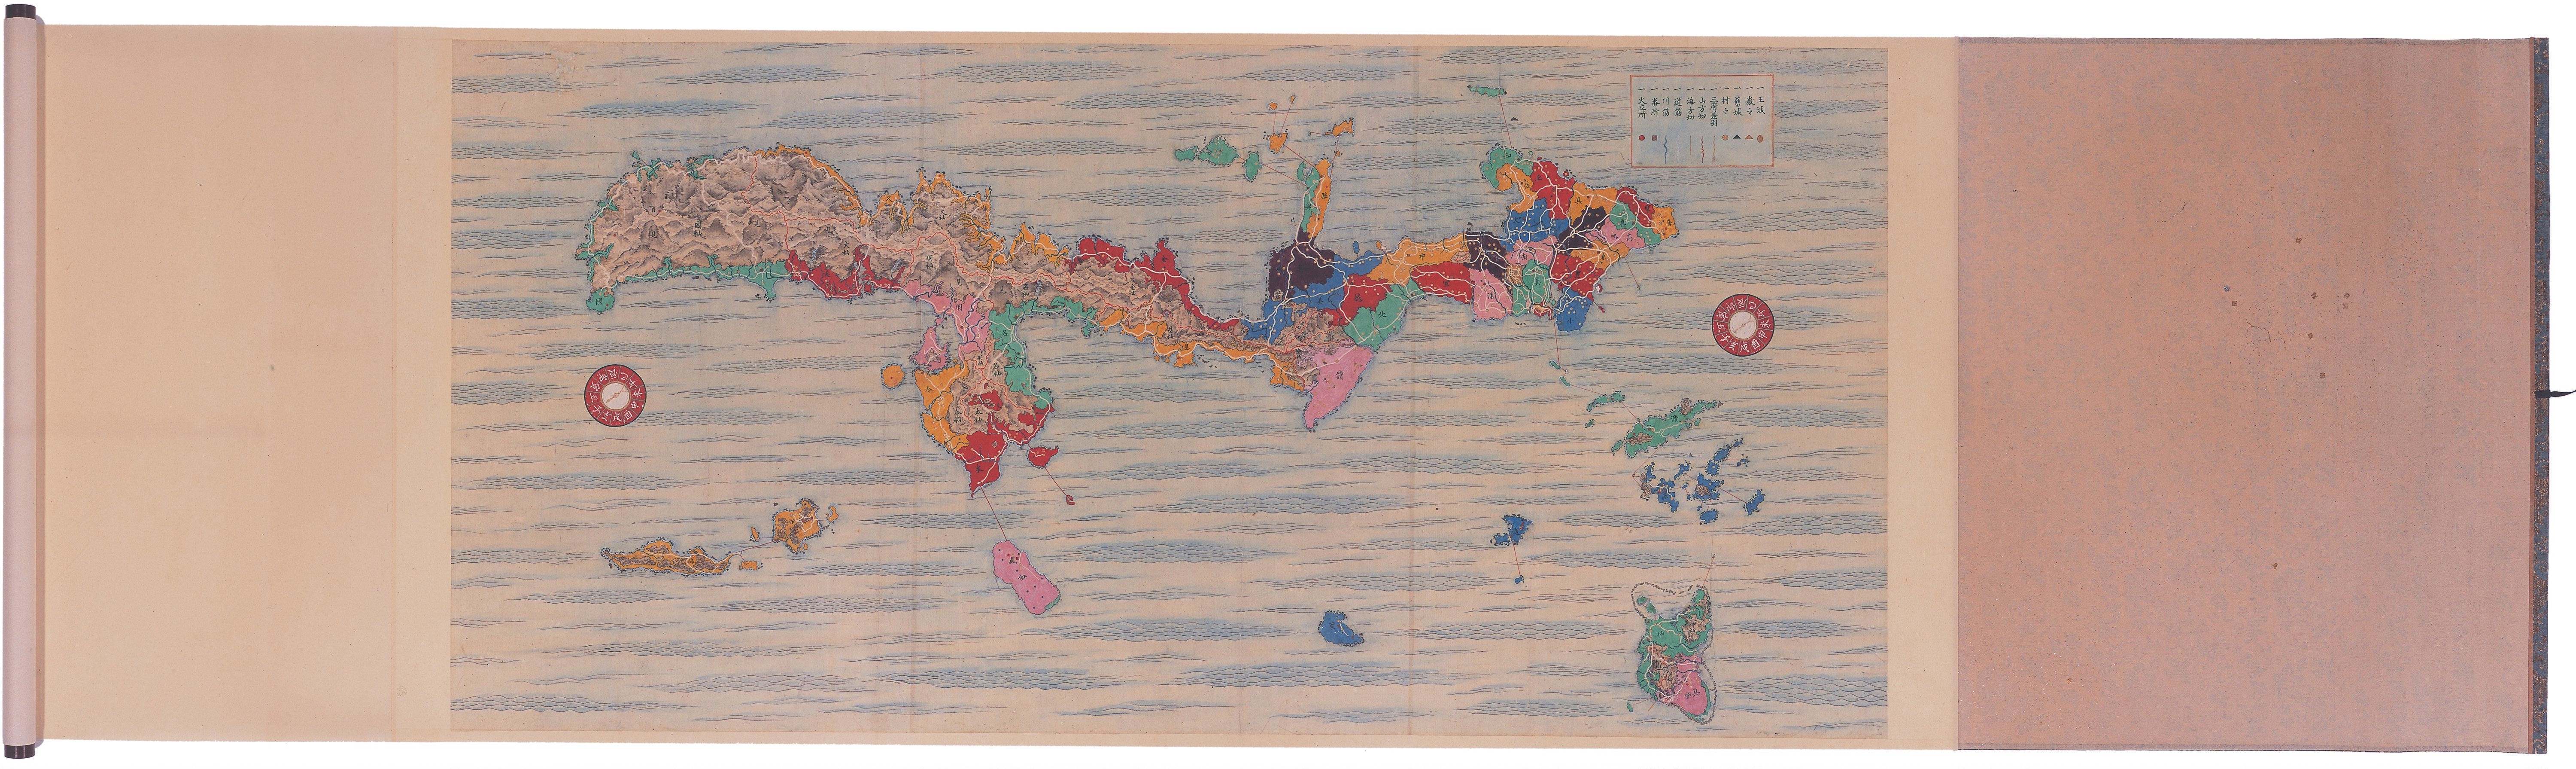 【Report】The eleventh session of the Global Studies Seminar series “Challenges in Global Studies” “The Japanese and Ryukyu: Thinking from Two Maps”